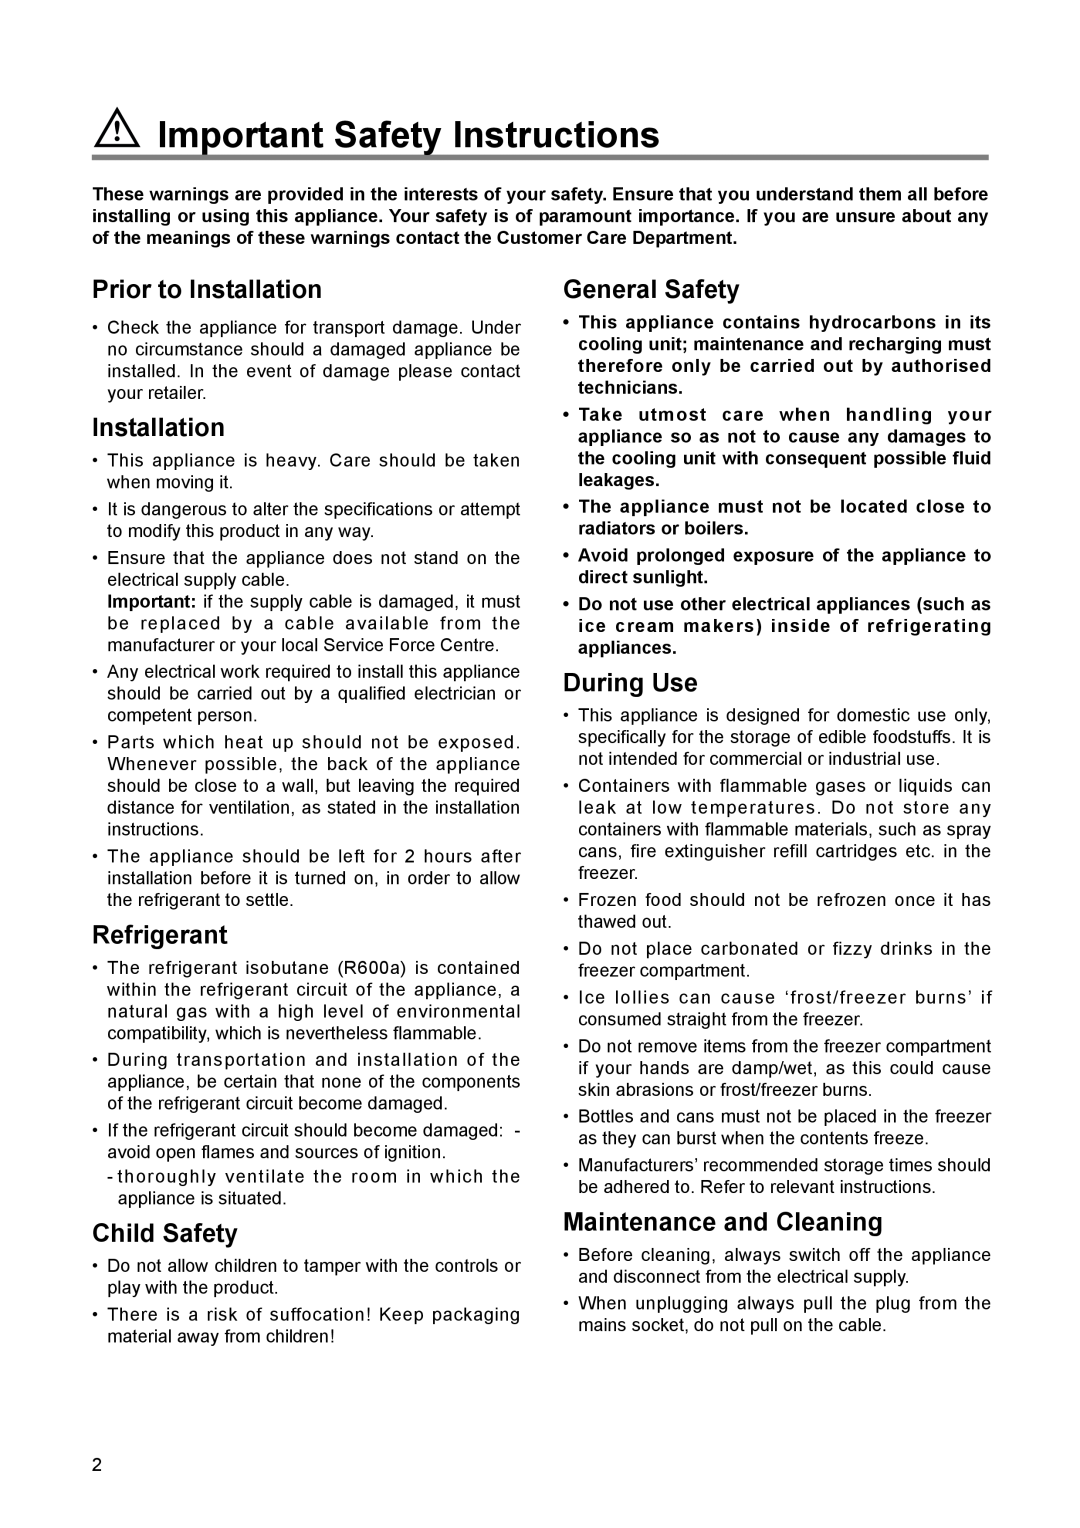 Electrolux EUN 12300 manual Important Safety Instructions, Prior to Installation, Refrigerant, Child Safety, General Safety 